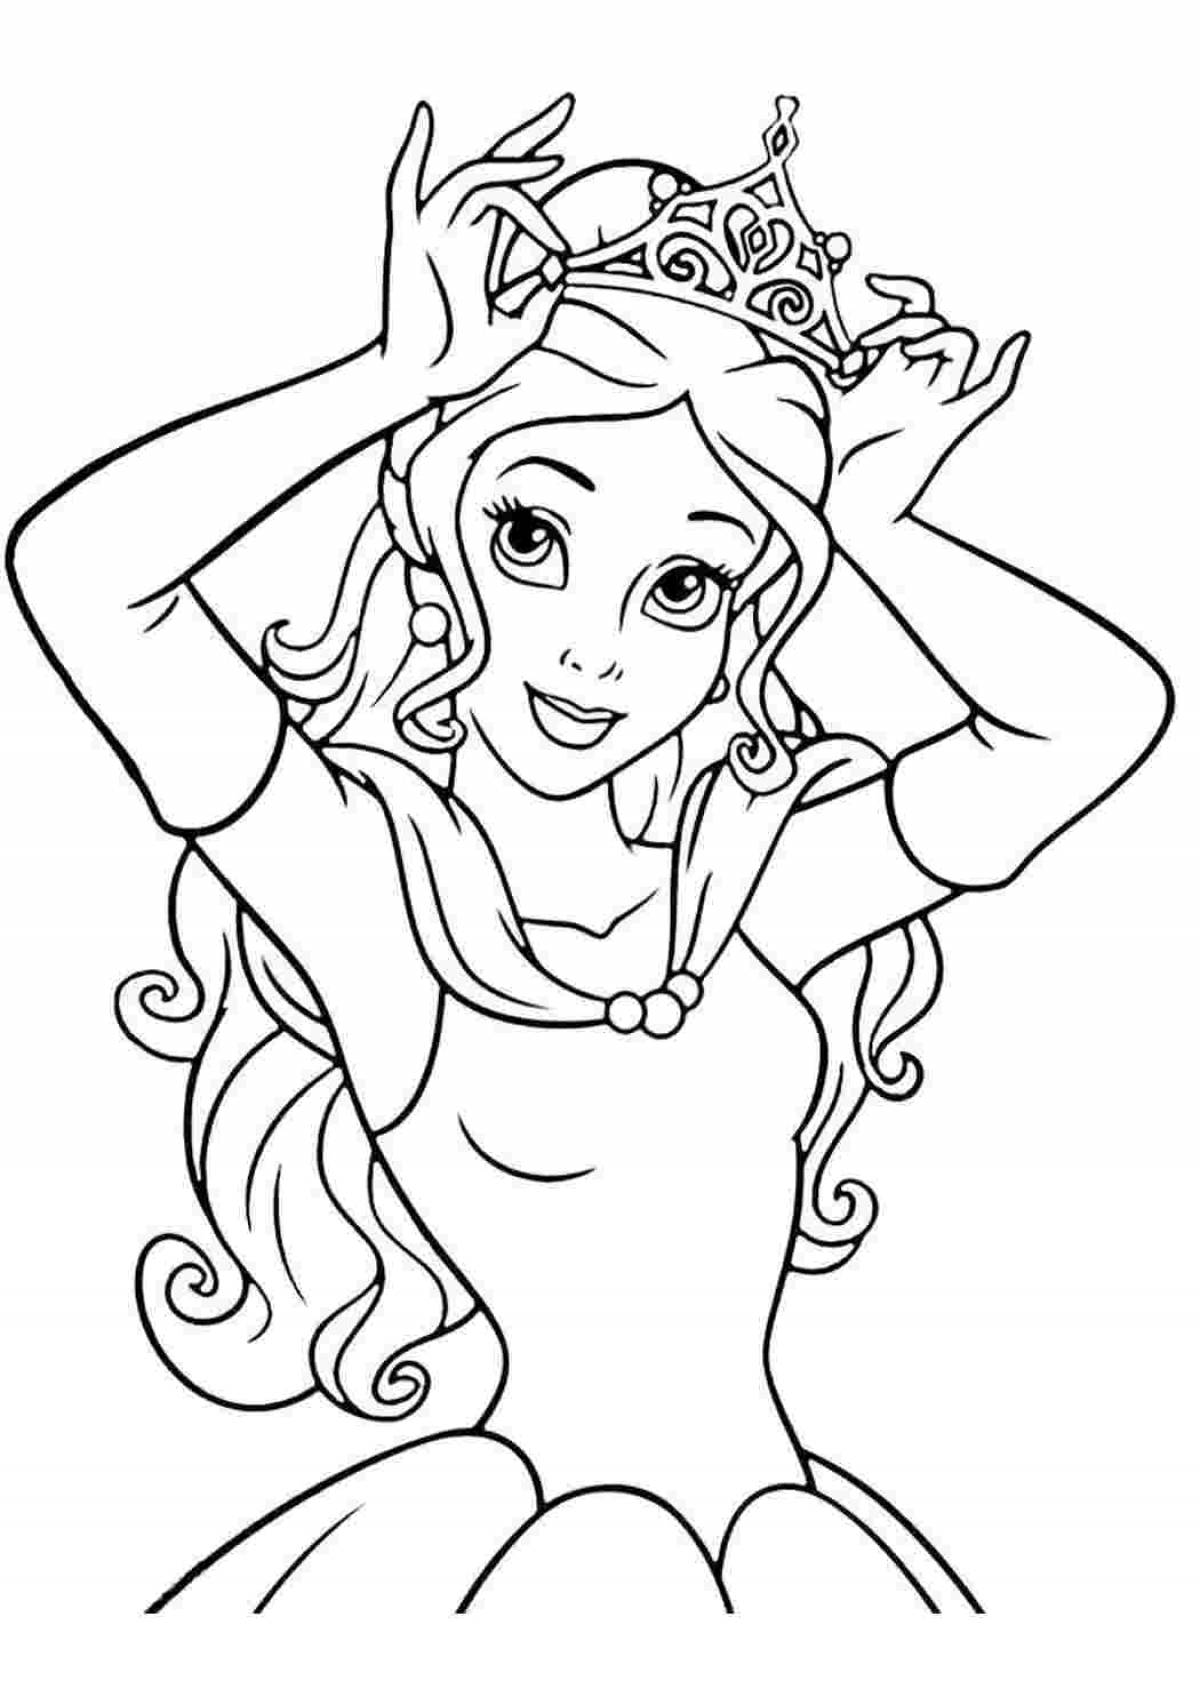 Luxury coloring drawing of a princess